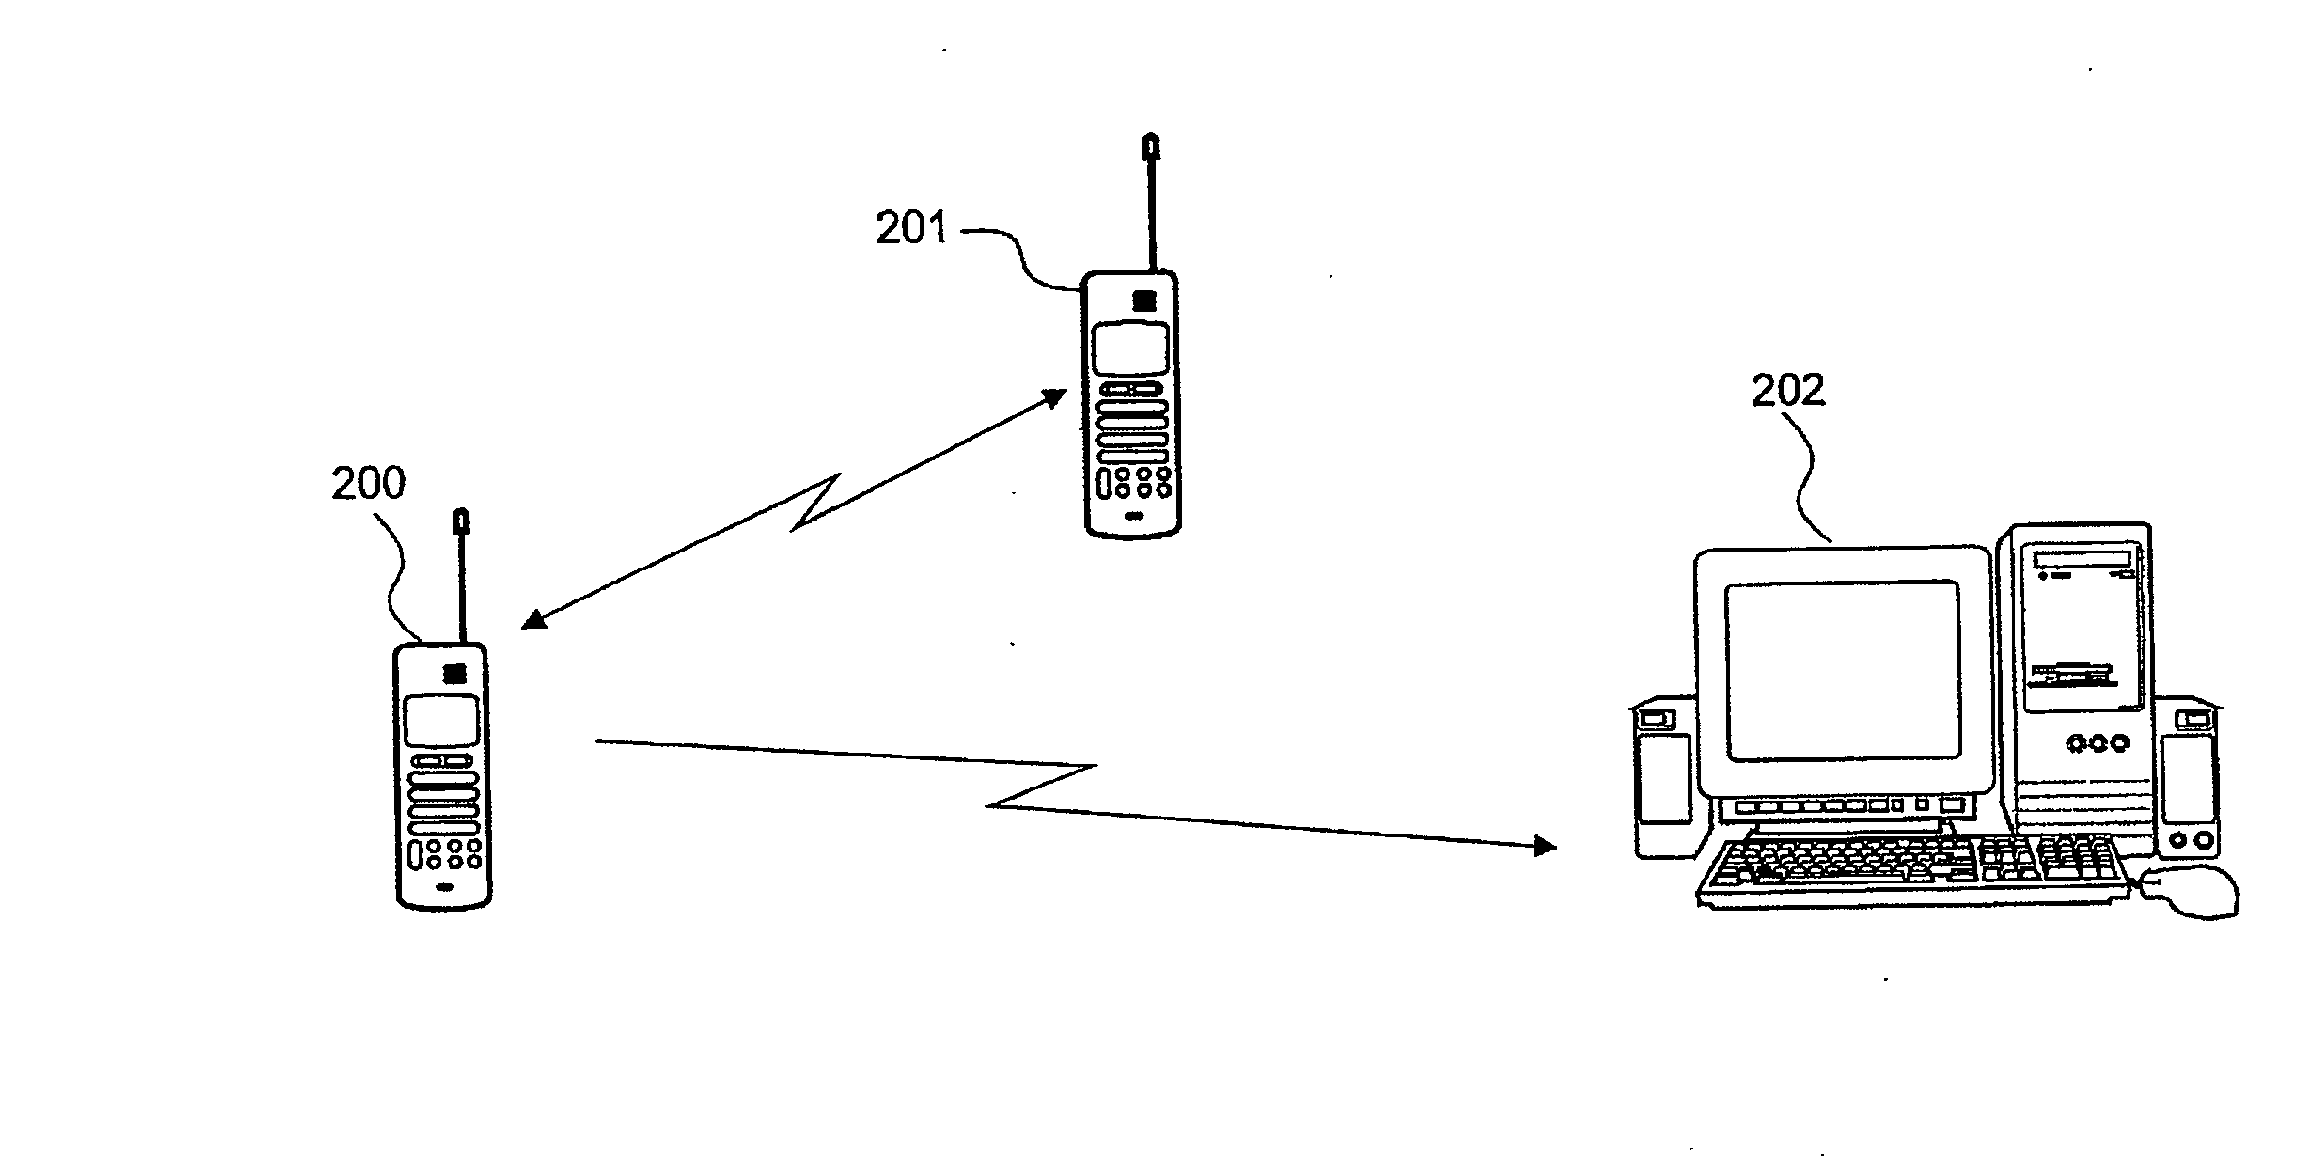 Method and apparatus for recording events